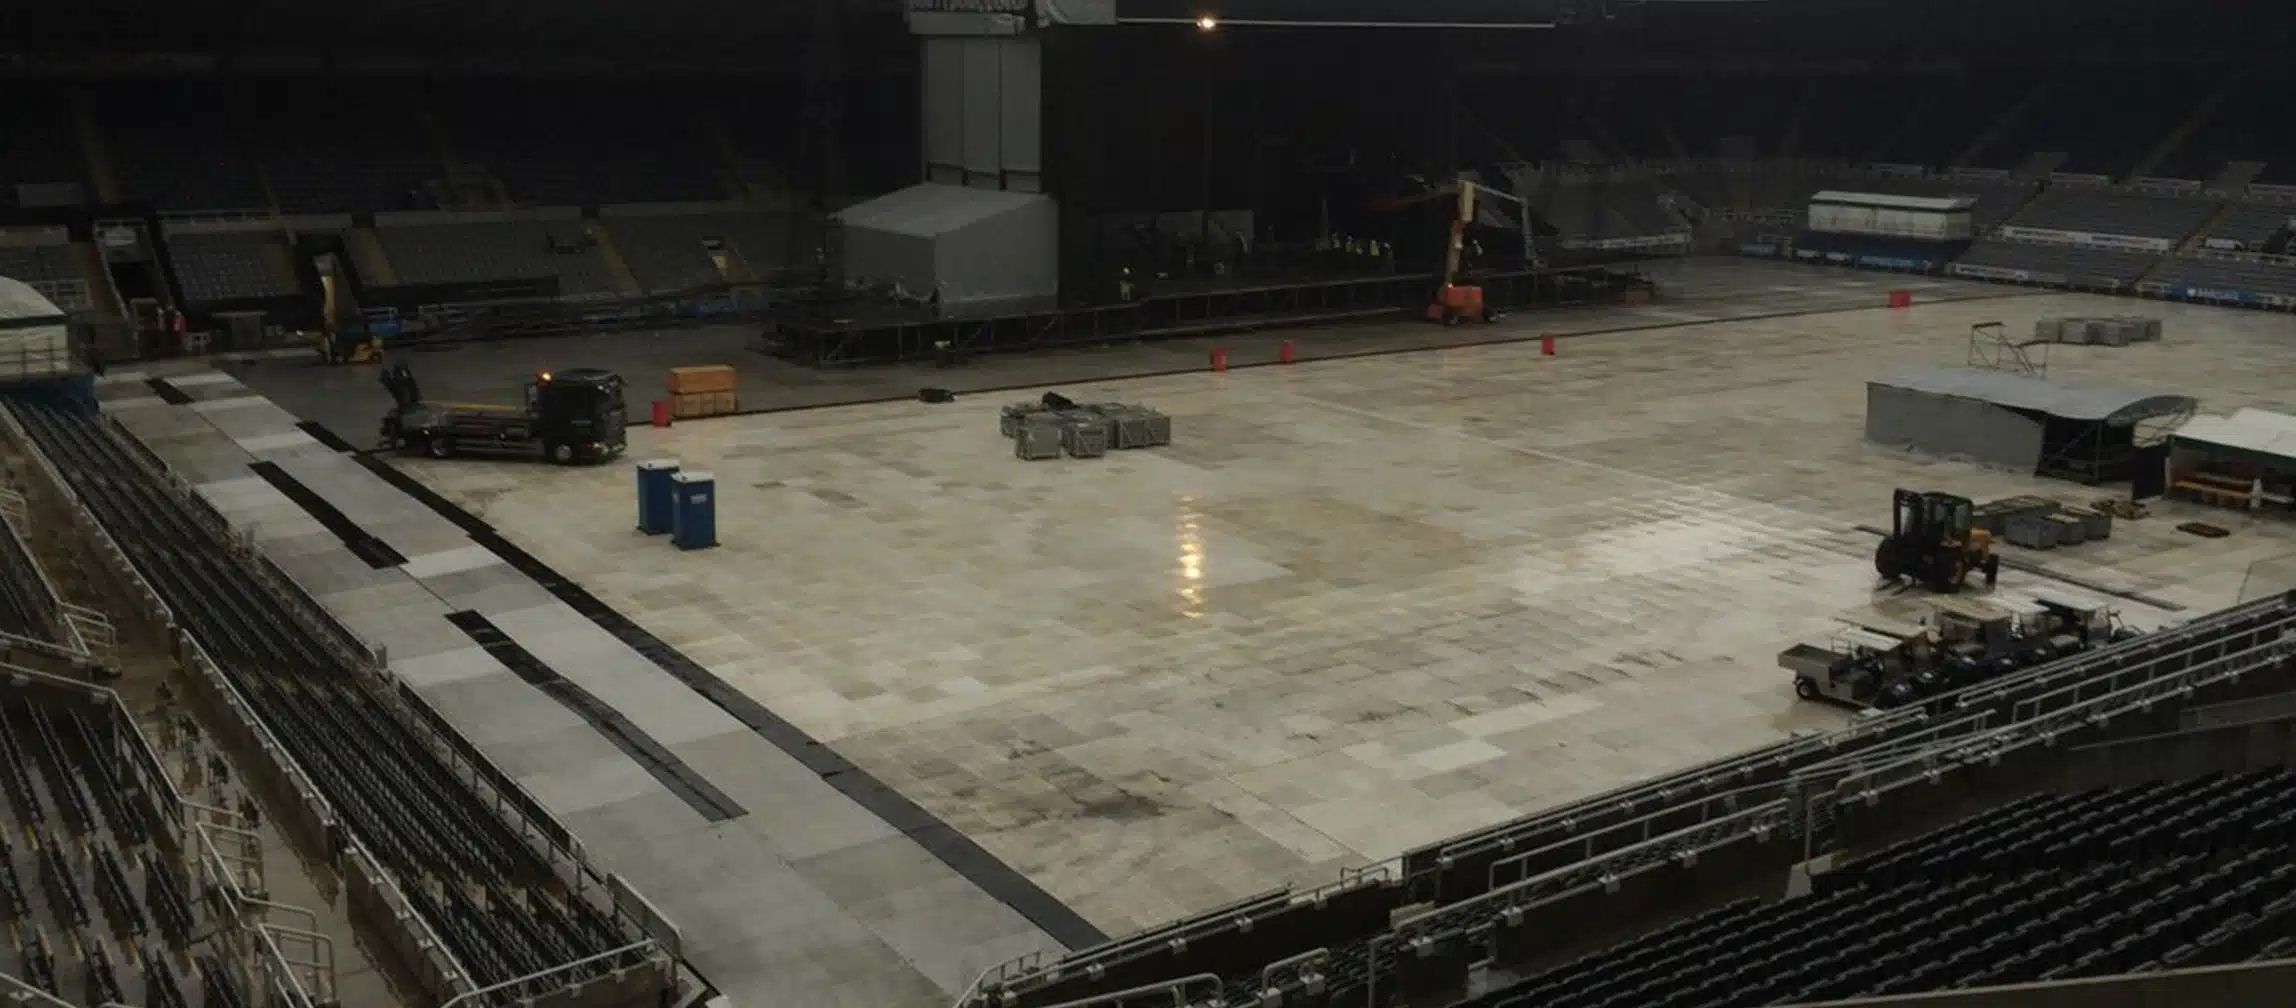 Ground protection mats for the Kings of Leon concert event